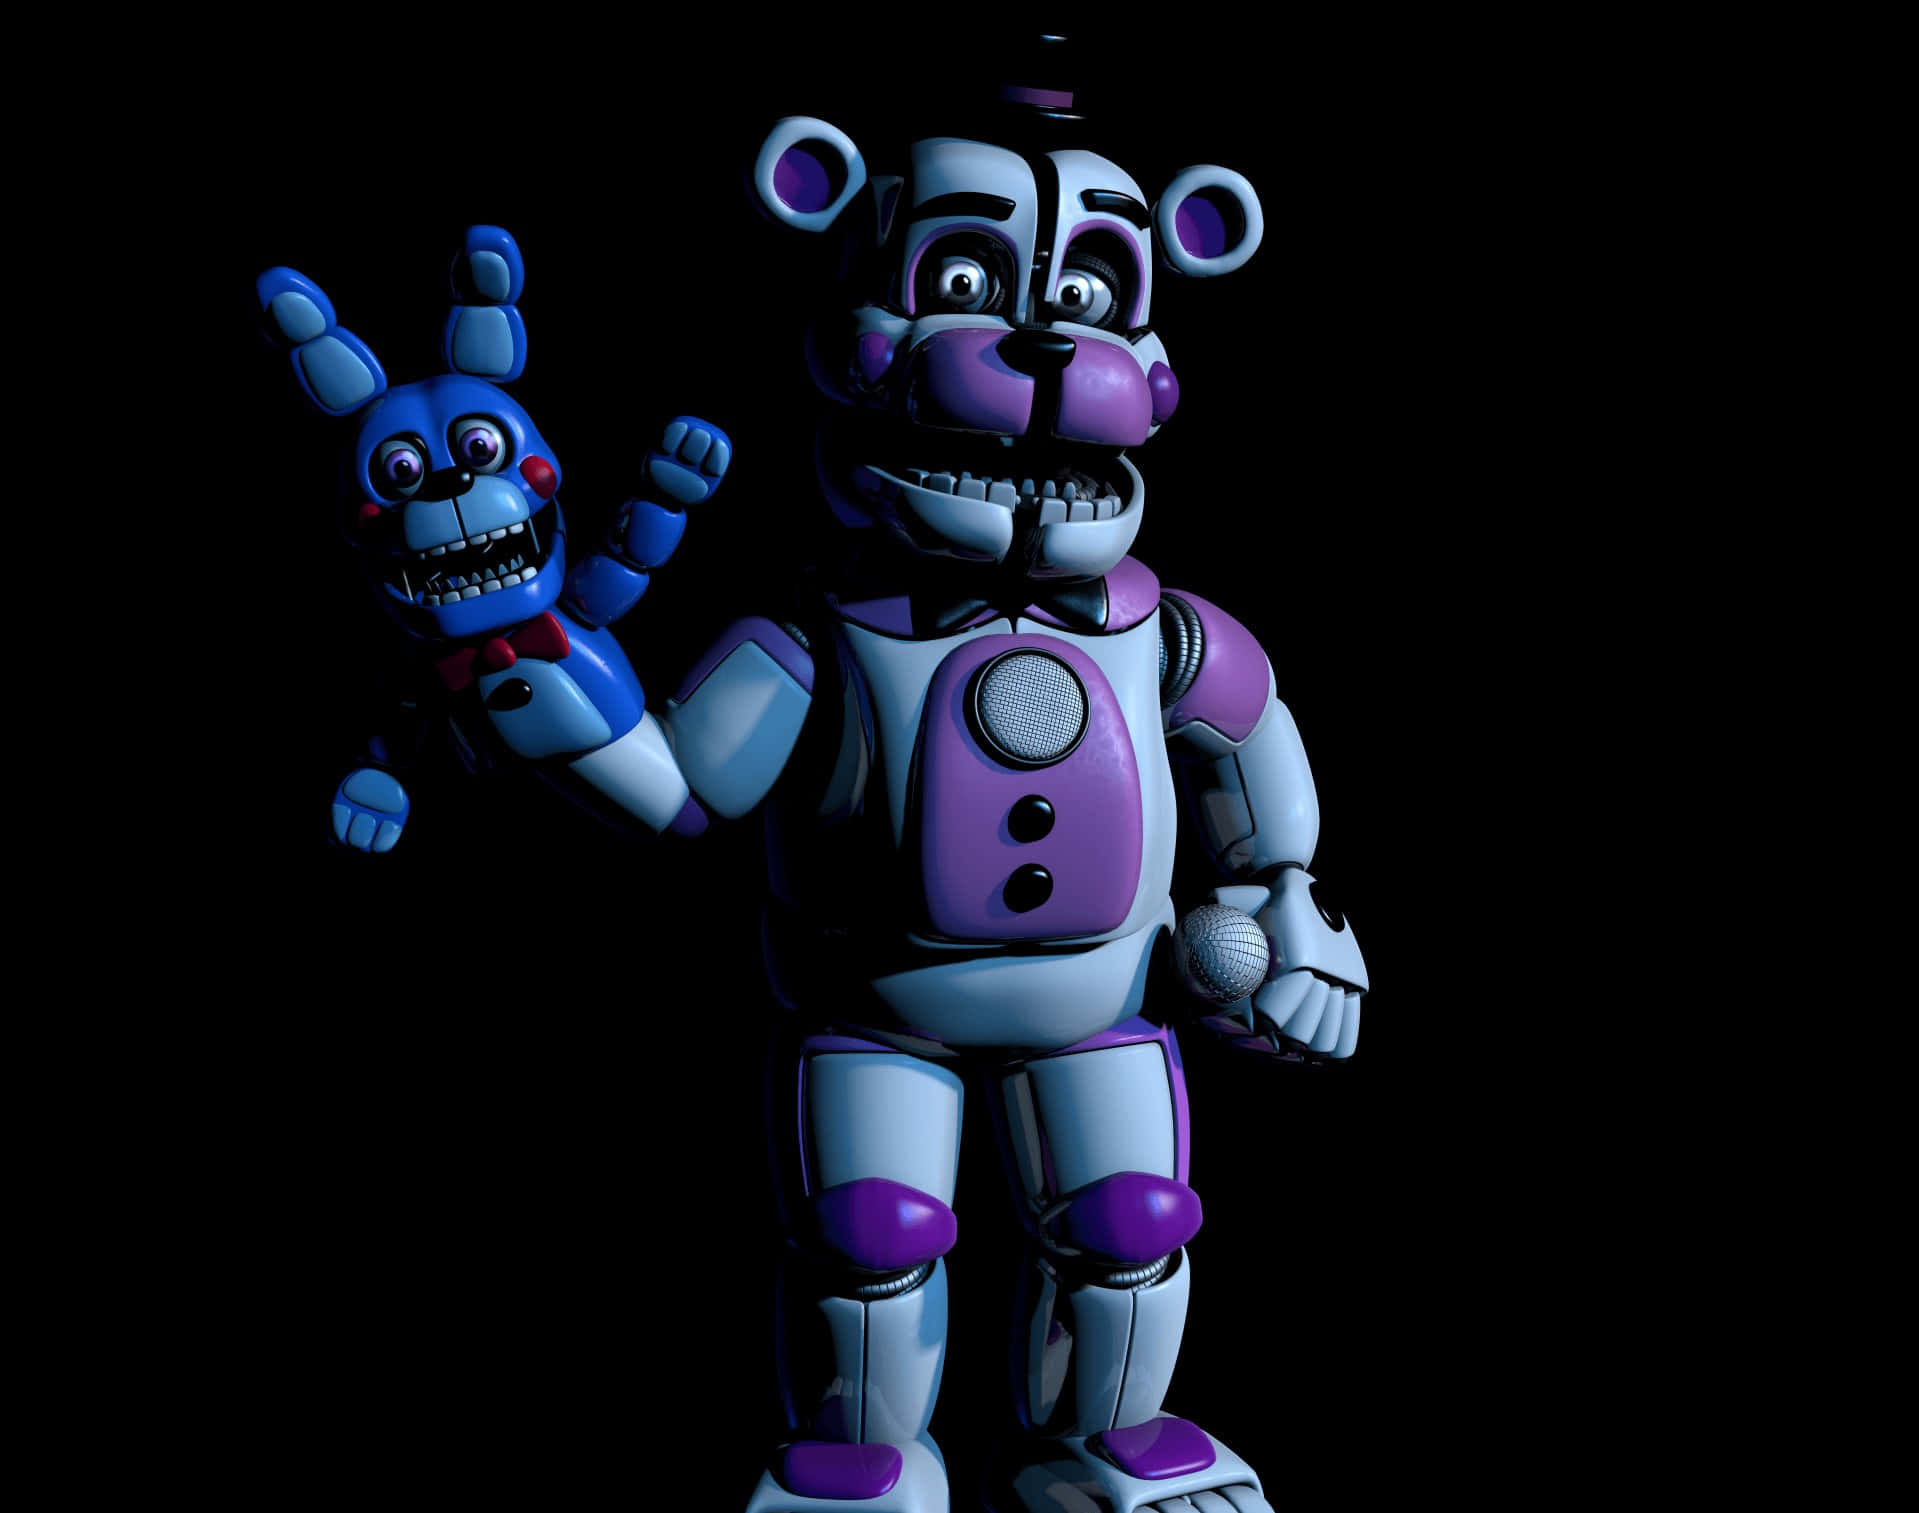 Funtime Freddy - The Entertainer Wallpaper